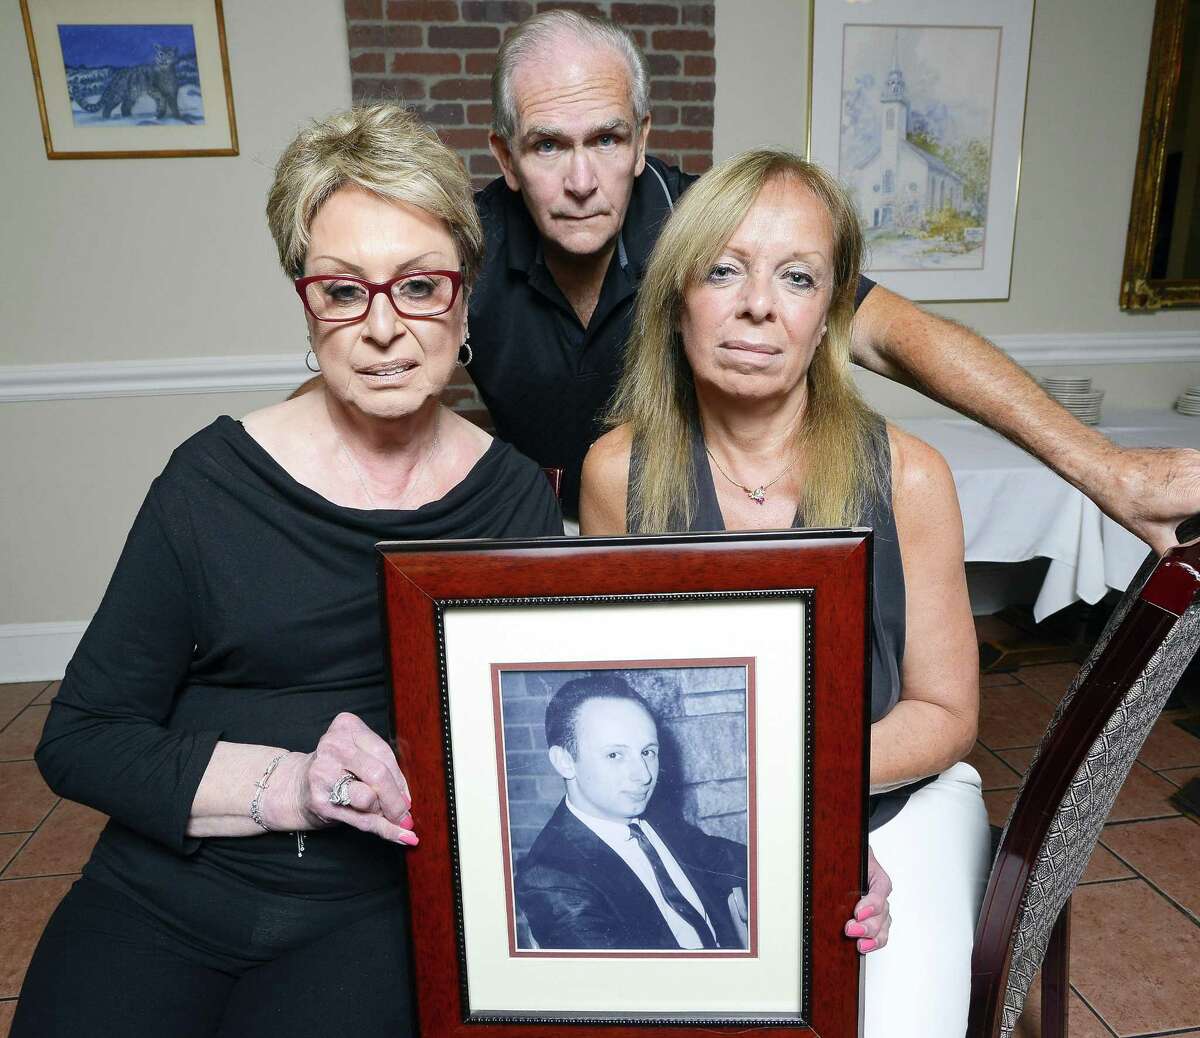 Toni Lupinacci, Fran Gross, and brother-in-law, Anthony "Butch" Lupinacci are photograph on August 23, 2017 with a portrait of Joe Pellicci at the family's restaurant on Stamford's Westside. Pellicci, shown in a portrait photograph taken around 1961 that hangs in the entrance way of Pellicci's Restaurant, was killed in 1973 in one of Stamford's most notorious murders, that remains still unsolved. They hope a soon-to-be-made TV show about the cold case prompts Stamford police to reopen it.